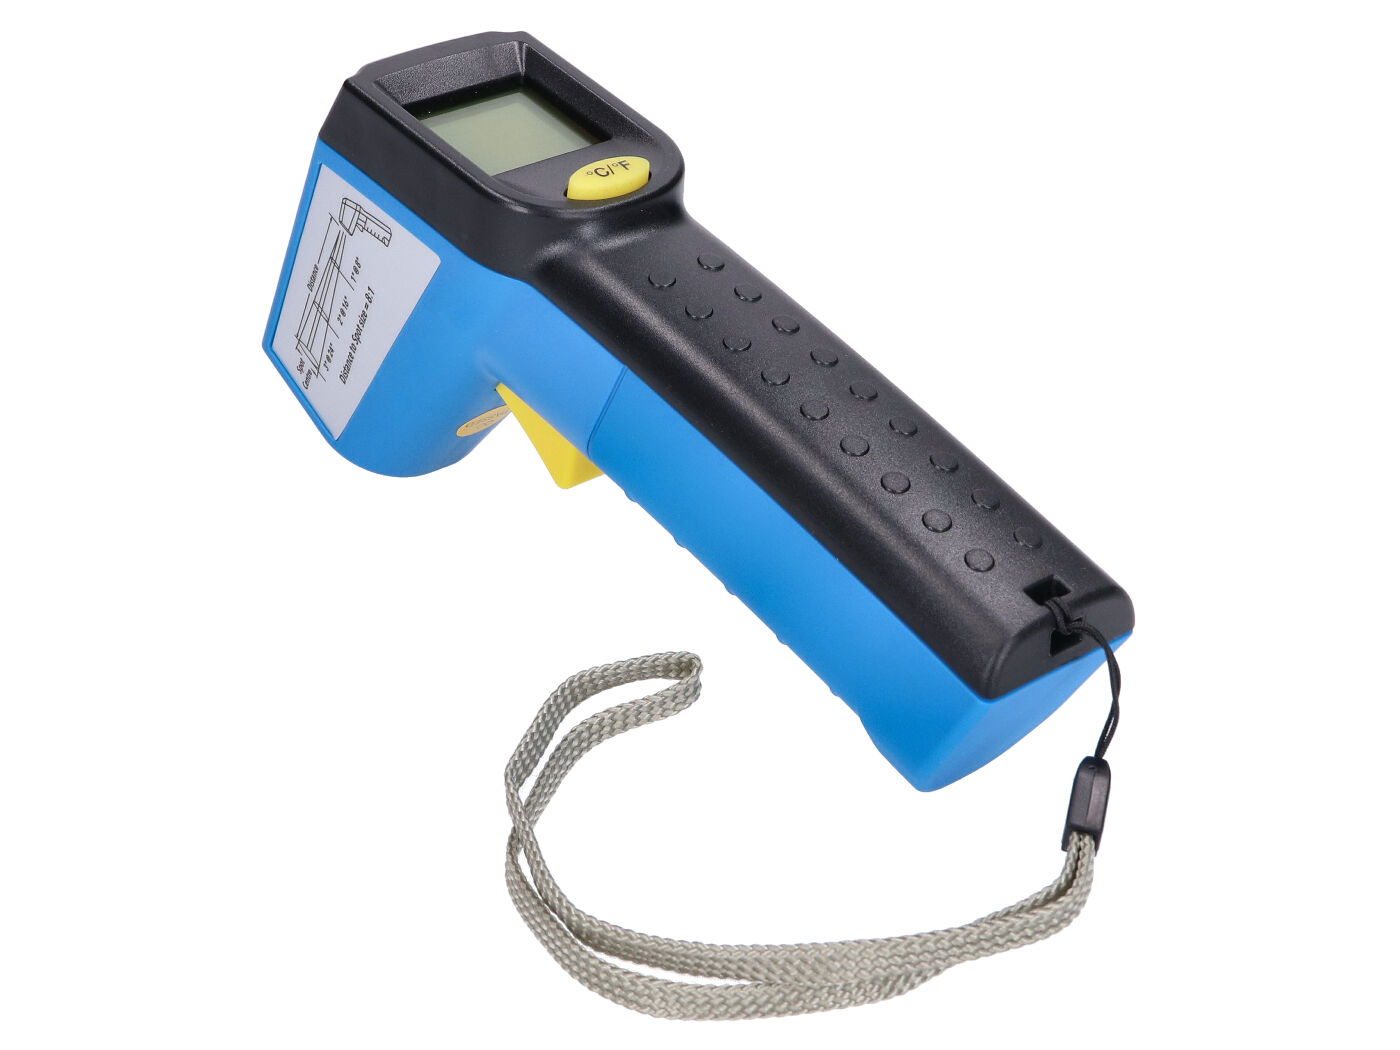 Infrared laser thermometer - 38 °C to + 520 °C